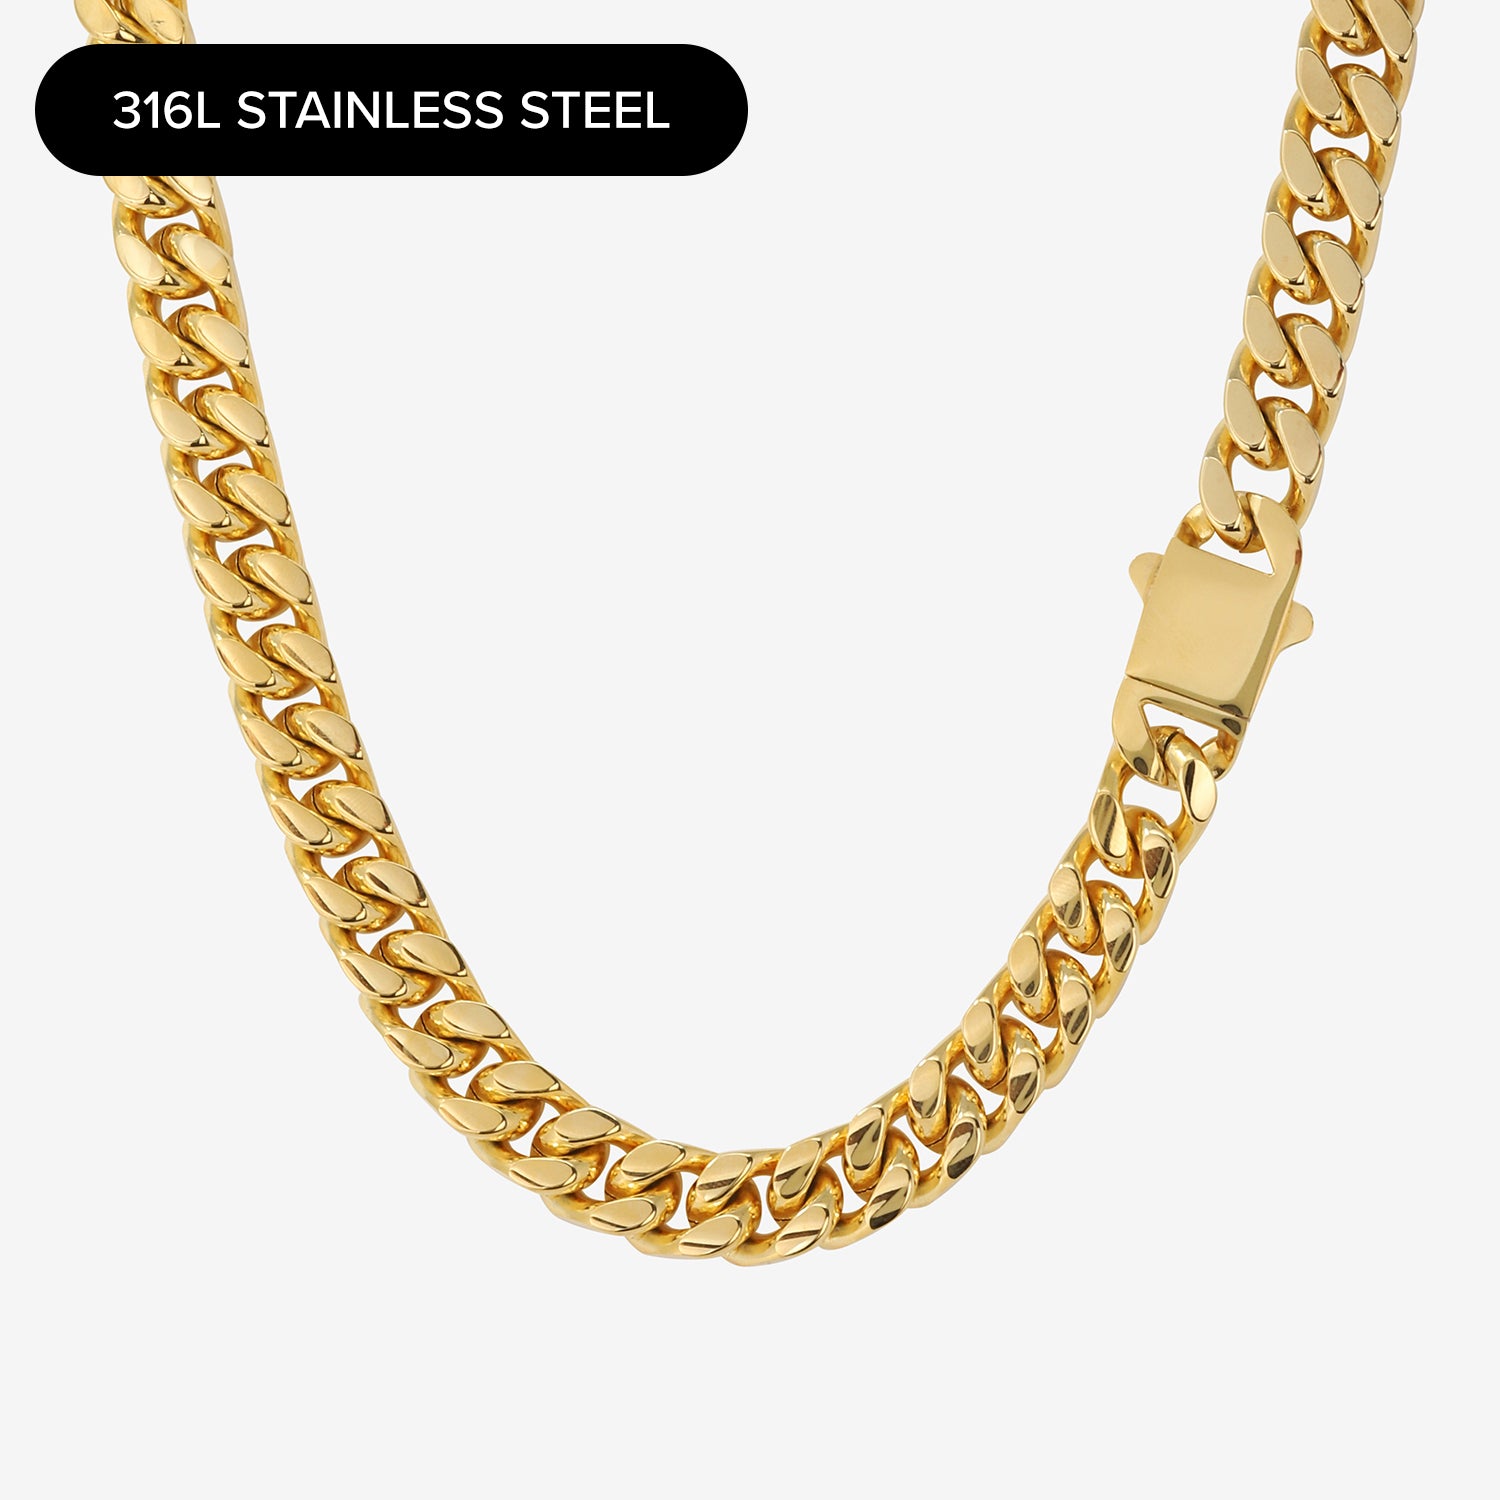 12mm Cuban Link Chain, Thick Cuban Stainless Steel Gold Chain 18to 24 Cuban Link Chain, Gold Miami Cuban Link Chain, Hefty Link Chain